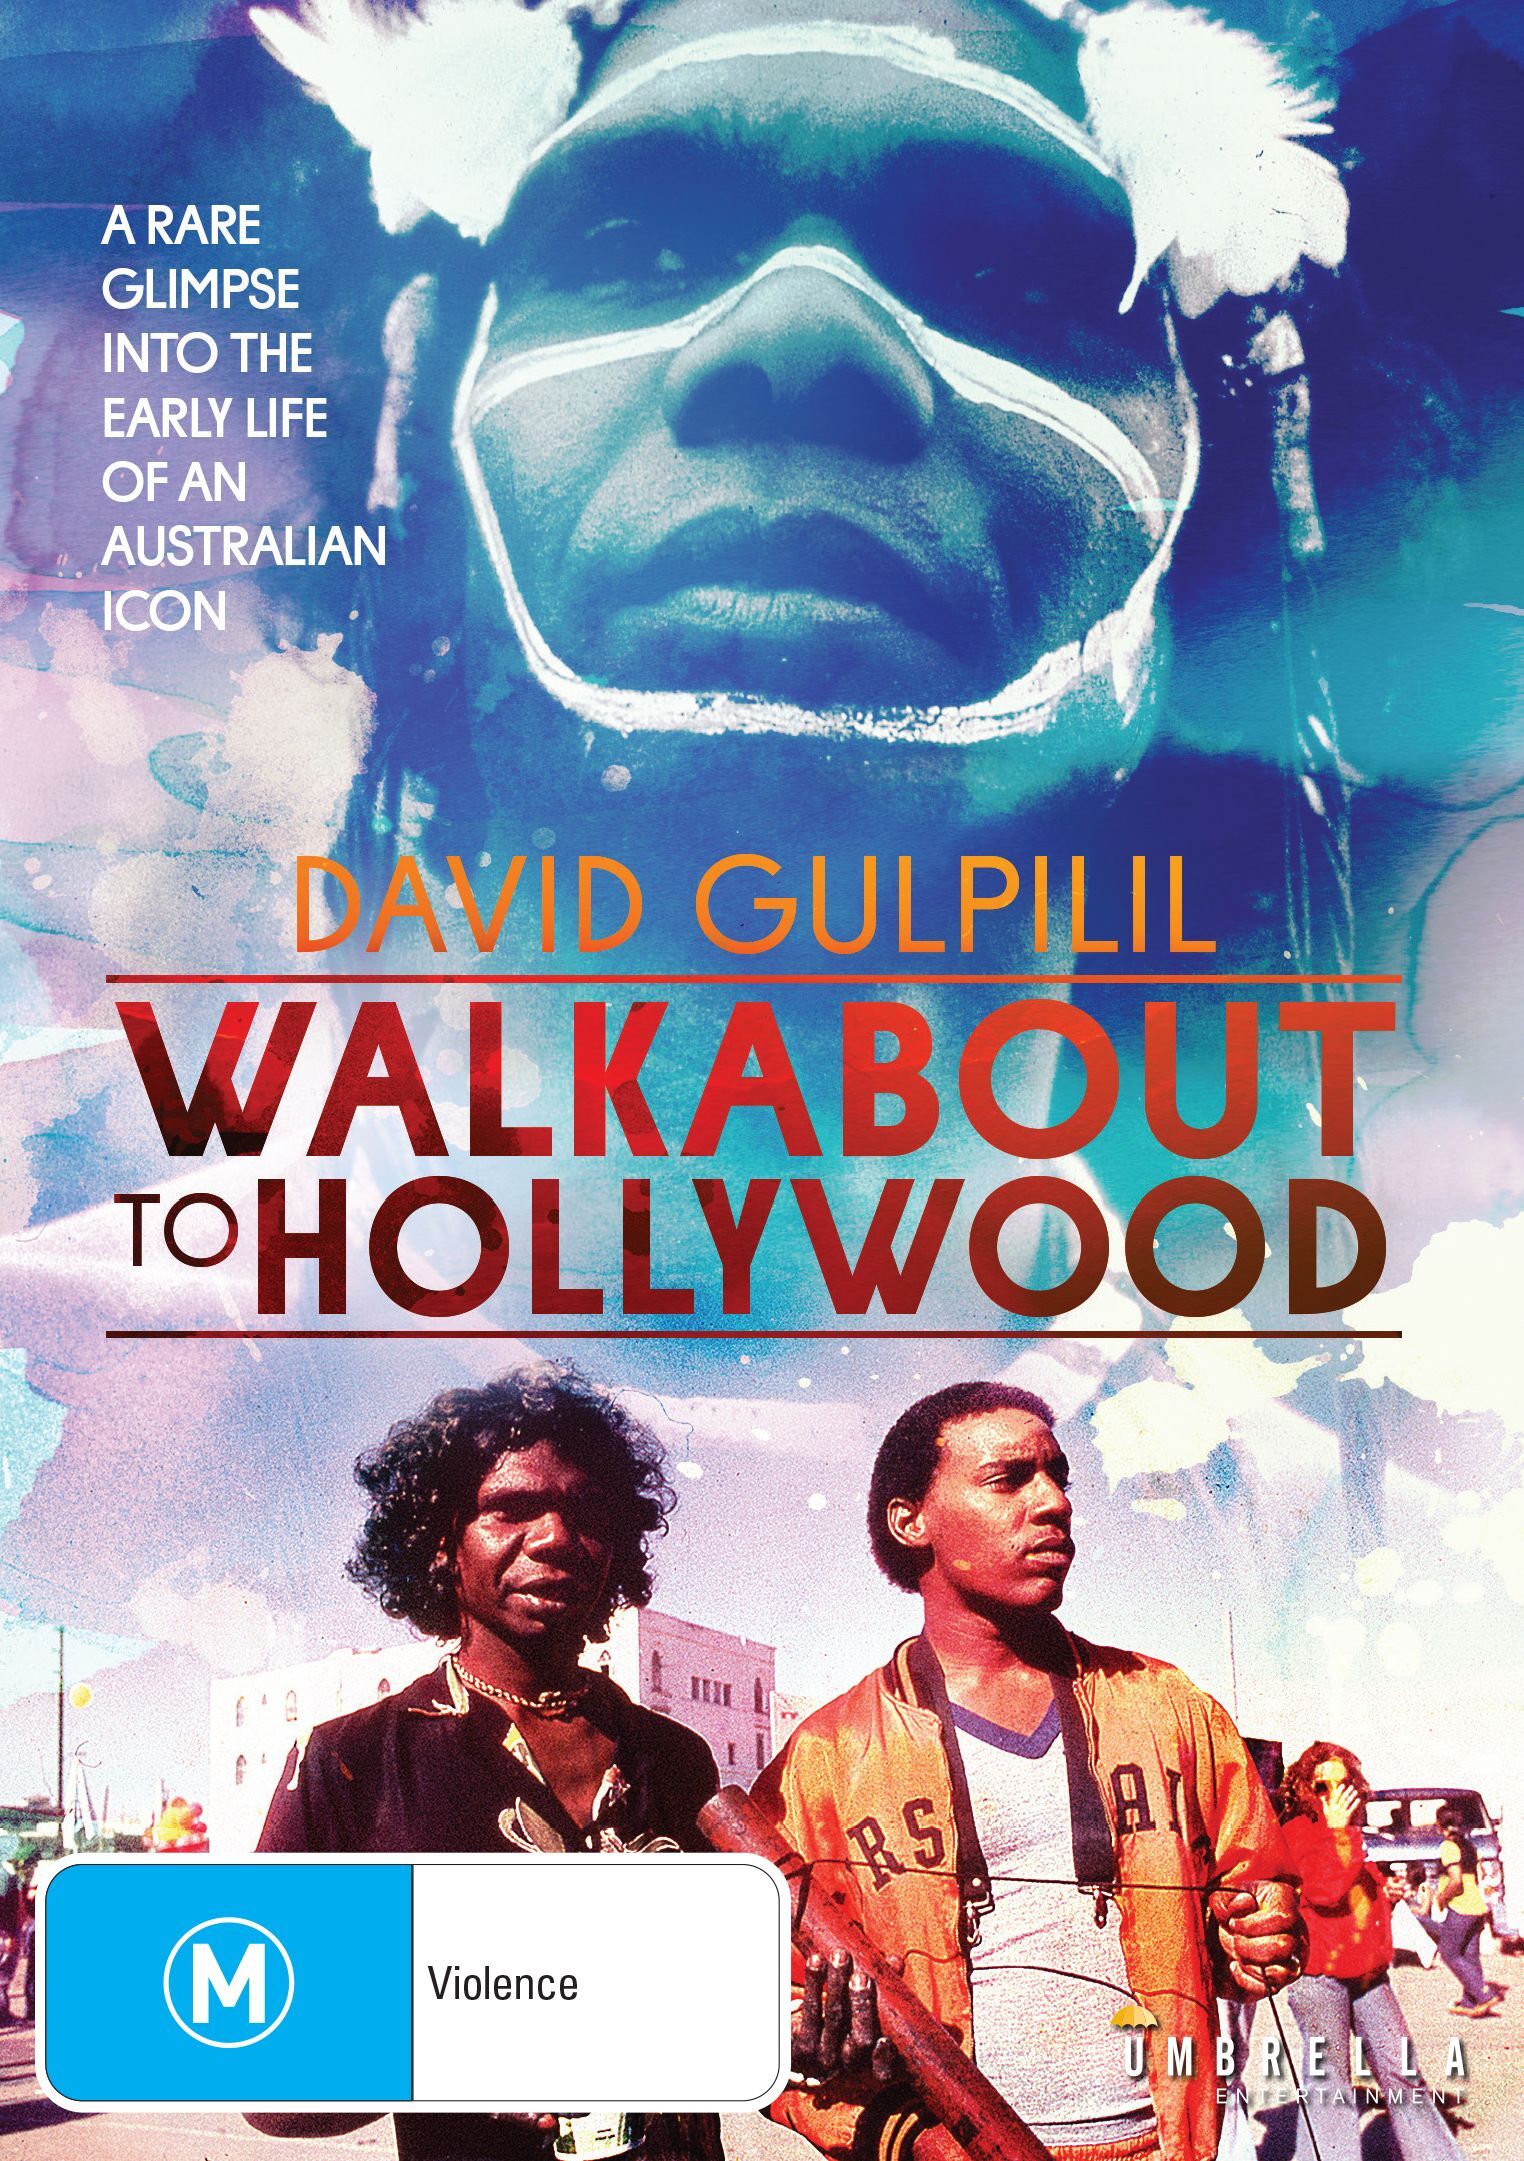 Walkabout to Hollywood